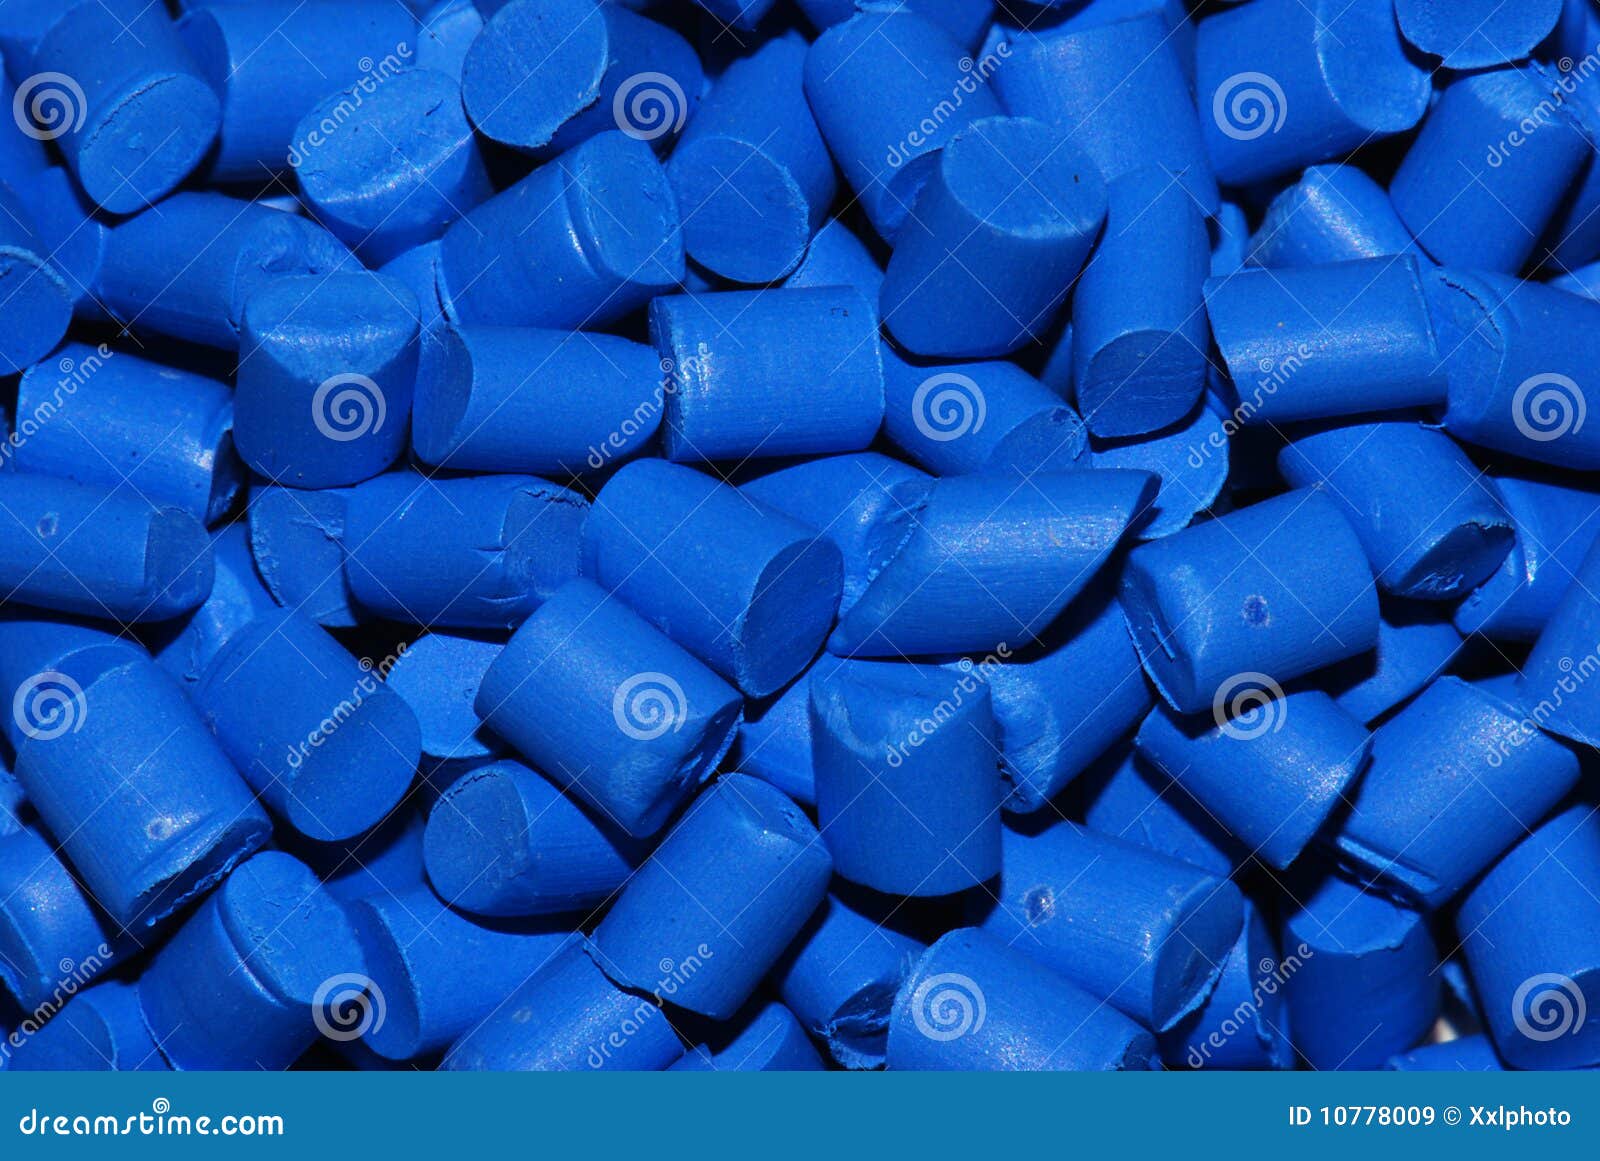 blue thermoplastic resin